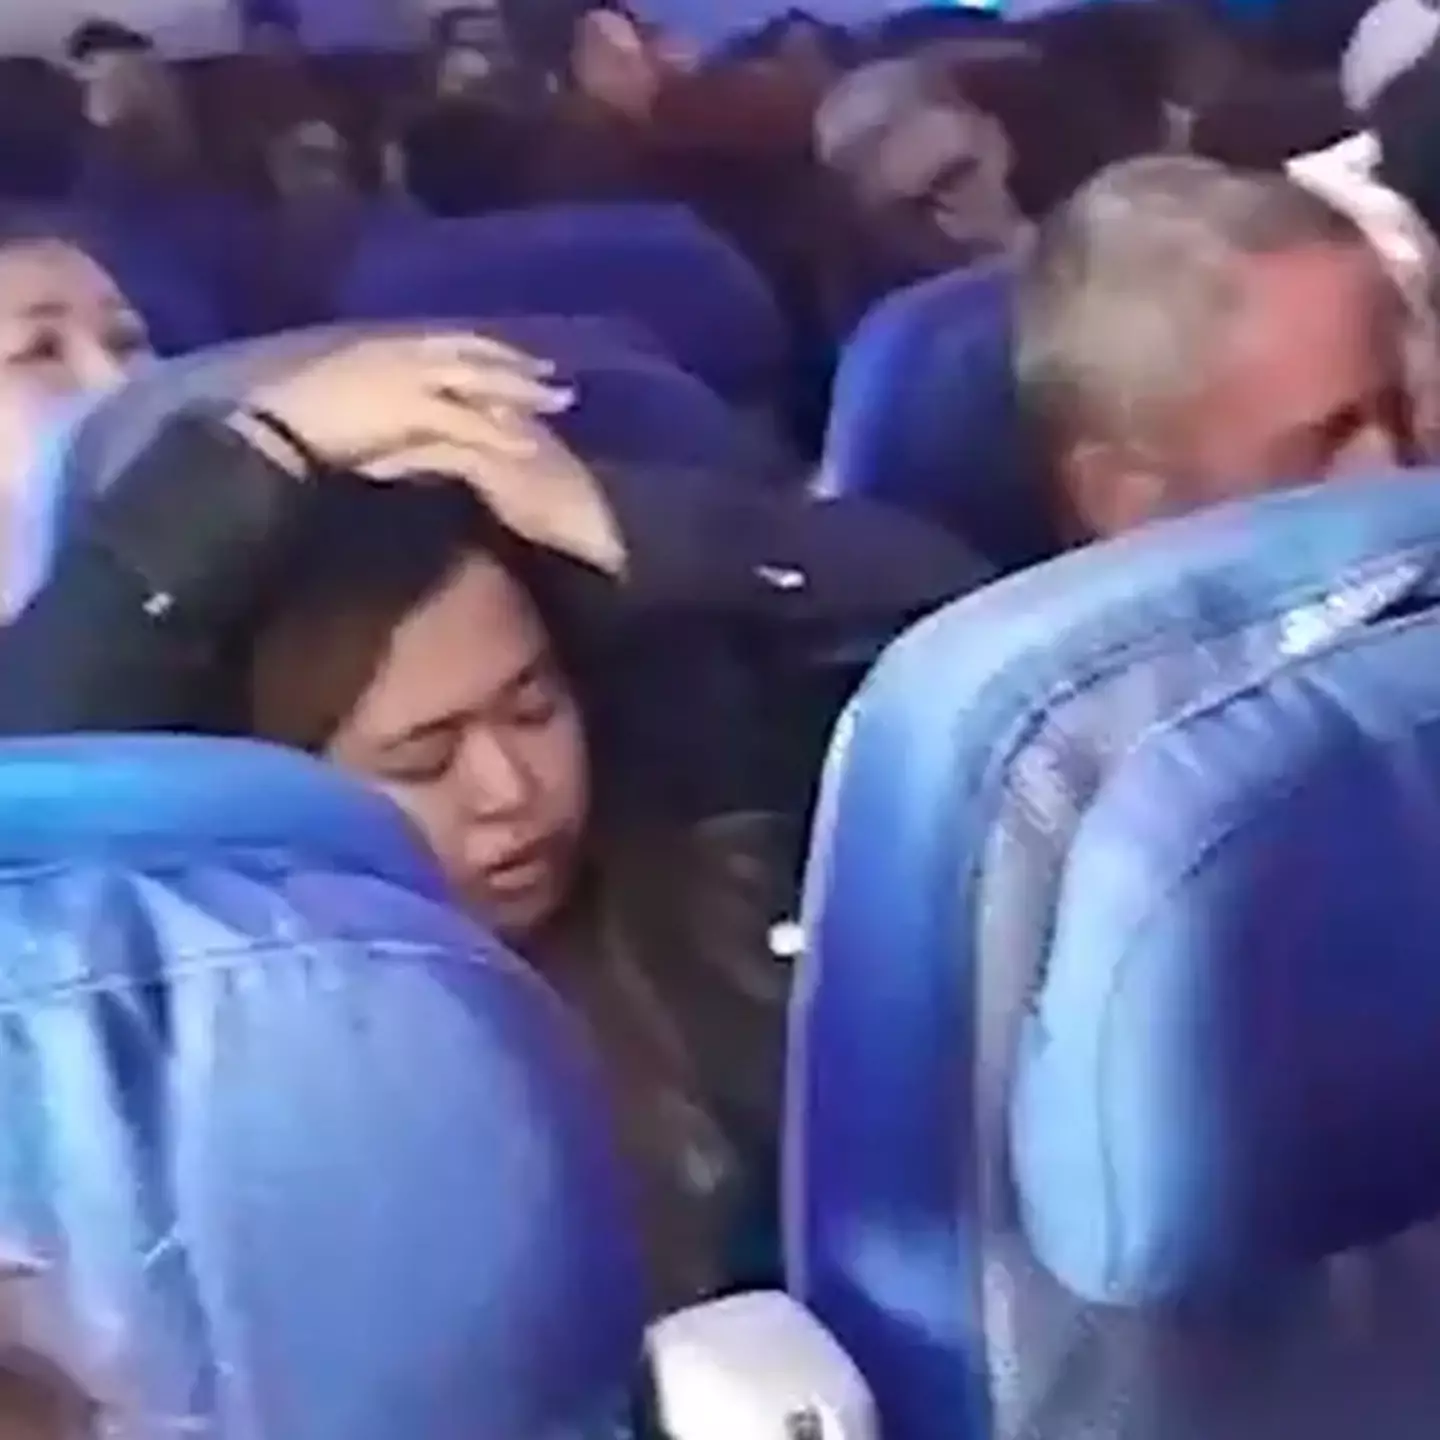 Terrifying footage shows inside plane during ‘worst turbulence you could ever think of’ after ‘sudden drop’ mid-flight